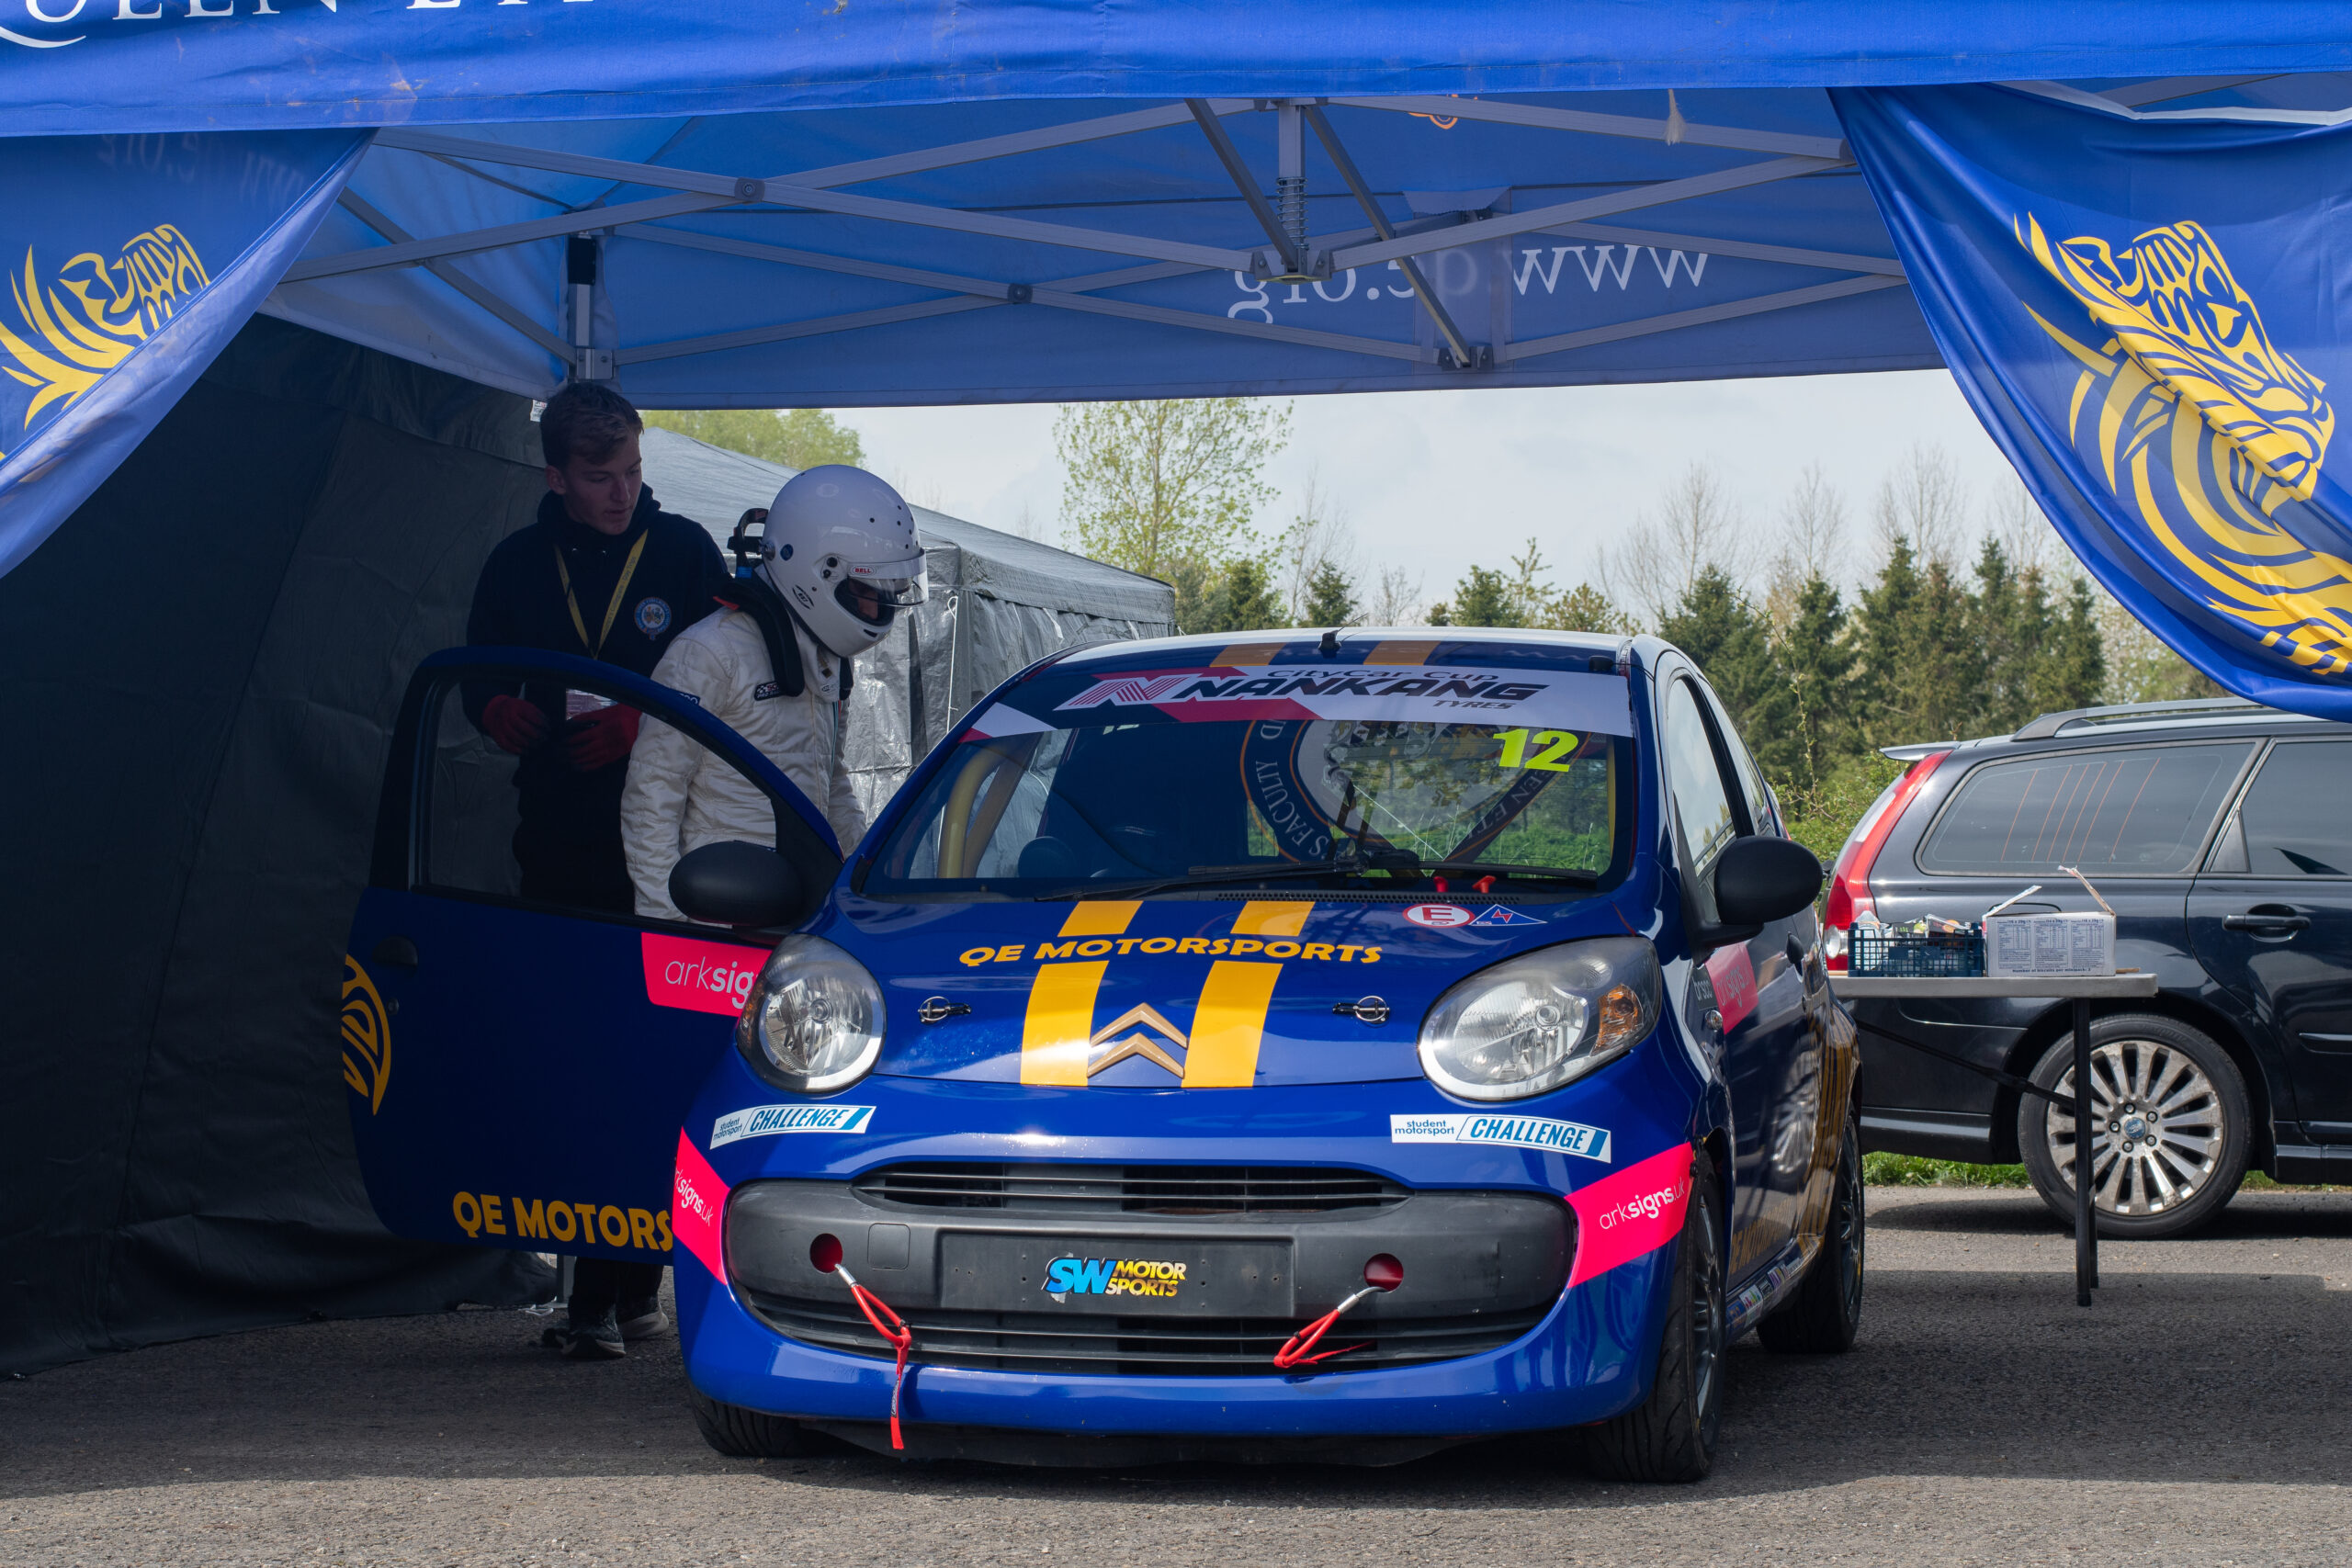 Simondet prepares for another session in the QE Motorsports C1 - Photo by Sam Matthews